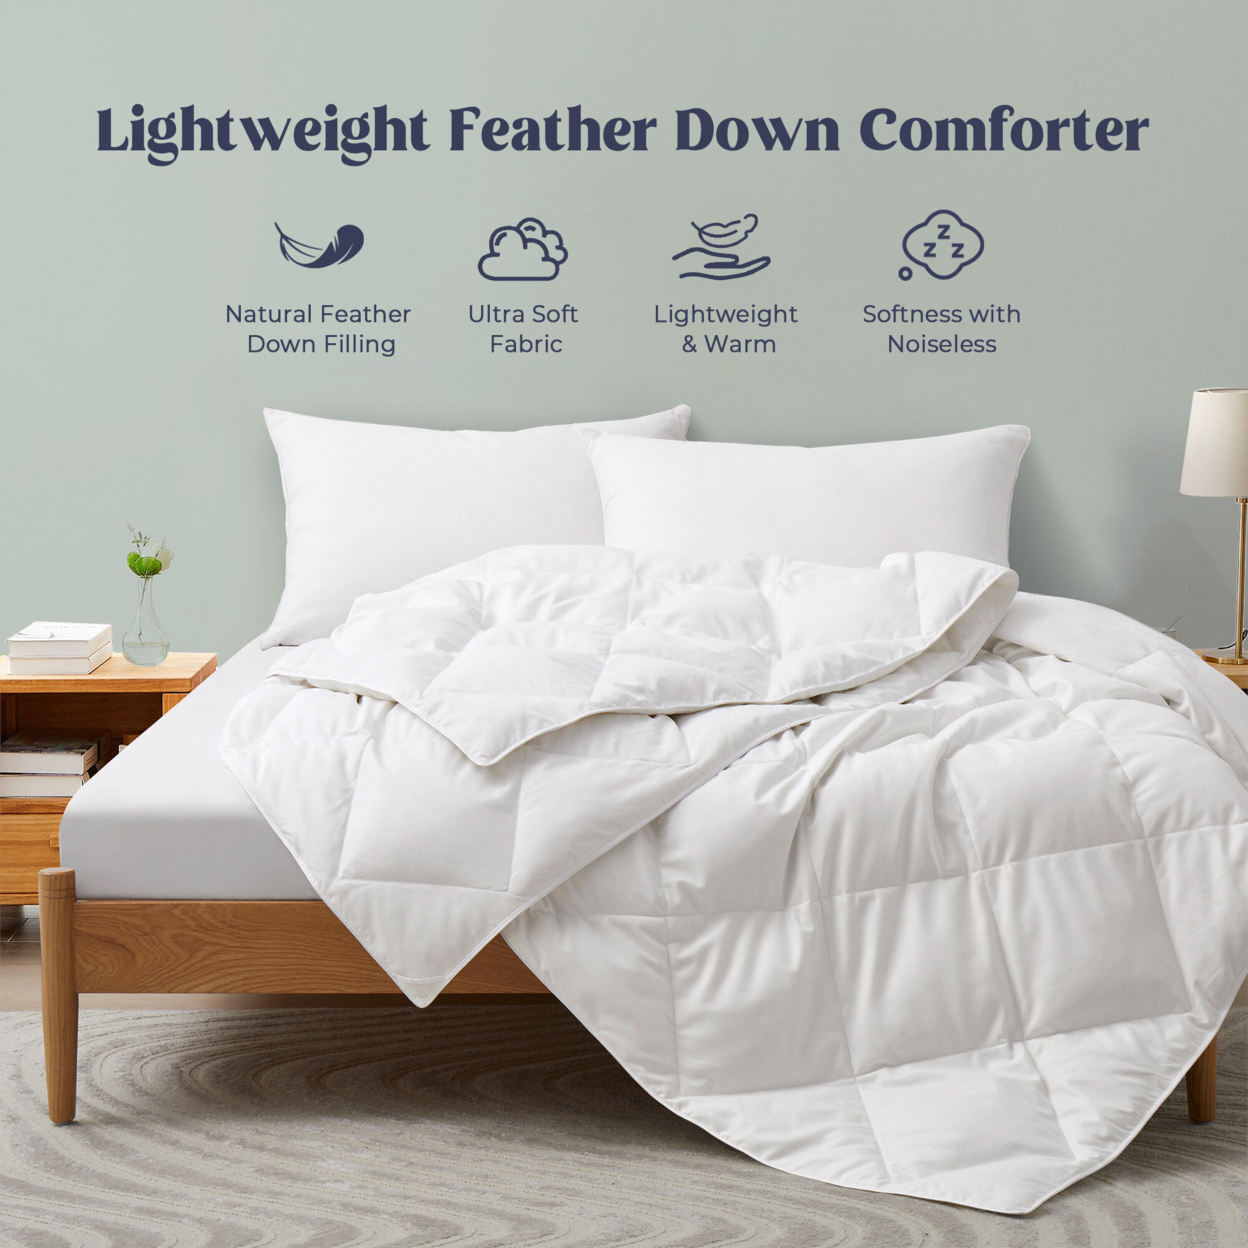 White Goose Feather Fiber And Down Comforter-Lightweight&Medium Weight, Sleep Soundly With Noiseless - Lightweight, King